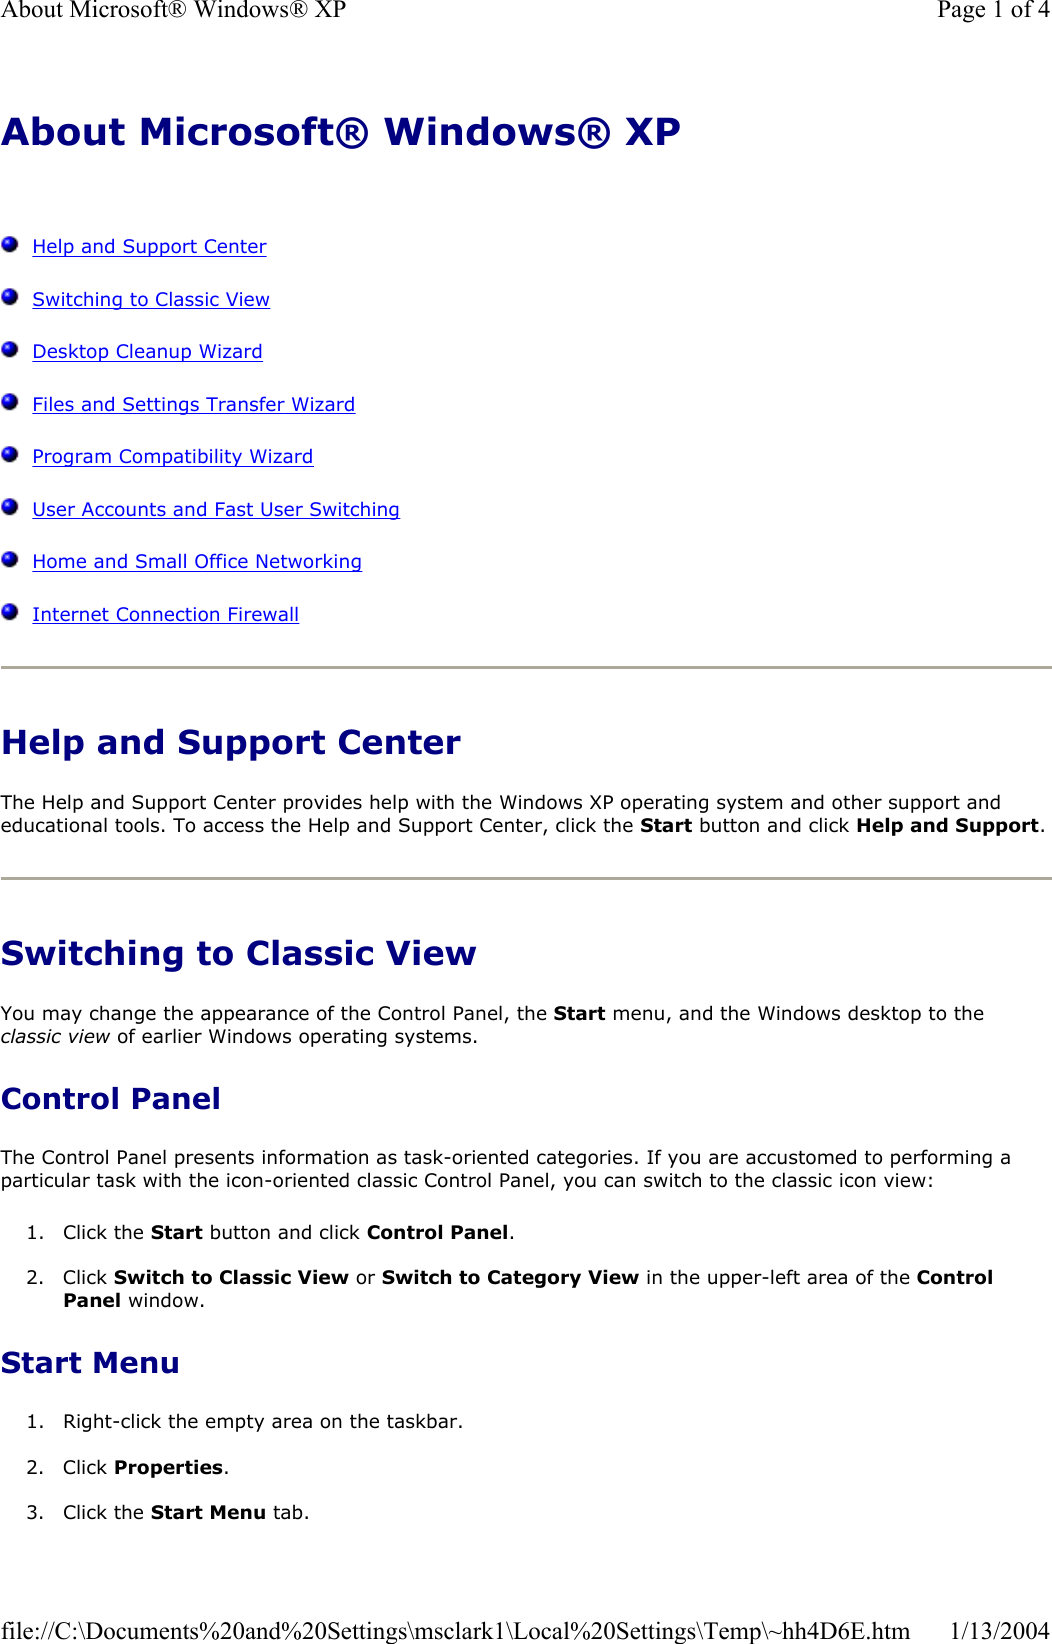 About Microsoft® Windows® XPHelp and Support CenterSwitching to Classic ViewDesktop Cleanup WizardFiles and Settings Transfer WizardProgram Compatibility WizardUser Accounts and Fast User SwitchingHome and Small Office NetworkingInternet Connection FirewallHelp and Support Center The Help and Support Center provides help with the Windows XP operating system and other support and educational tools. To access the Help and Support Center, click the Start button and click Help and Support.Switching to Classic View You may change the appearance of the Control Panel, the Start menu, and the Windows desktop to the classic view of earlier Windows operating systems. Control Panel The Control Panel presents information as task-oriented categories. If you are accustomed to performing a particular task with the icon-oriented classic Control Panel, you can switch to the classic icon view: 1. Click the Start button and click Control Panel.2. Click Switch to Classic View or Switch to Category View in the upper-left area of the Control Panel window.  Start Menu 1. Right-click the empty area on the taskbar. 2. Click Properties.3. Click the Start Menu tab. Page 1 of 4About Microsoft® Windows® XP1/13/2004file://C:\Documents%20and%20Settings\msclark1\Local%20Settings\Temp\~hh4D6E.htm